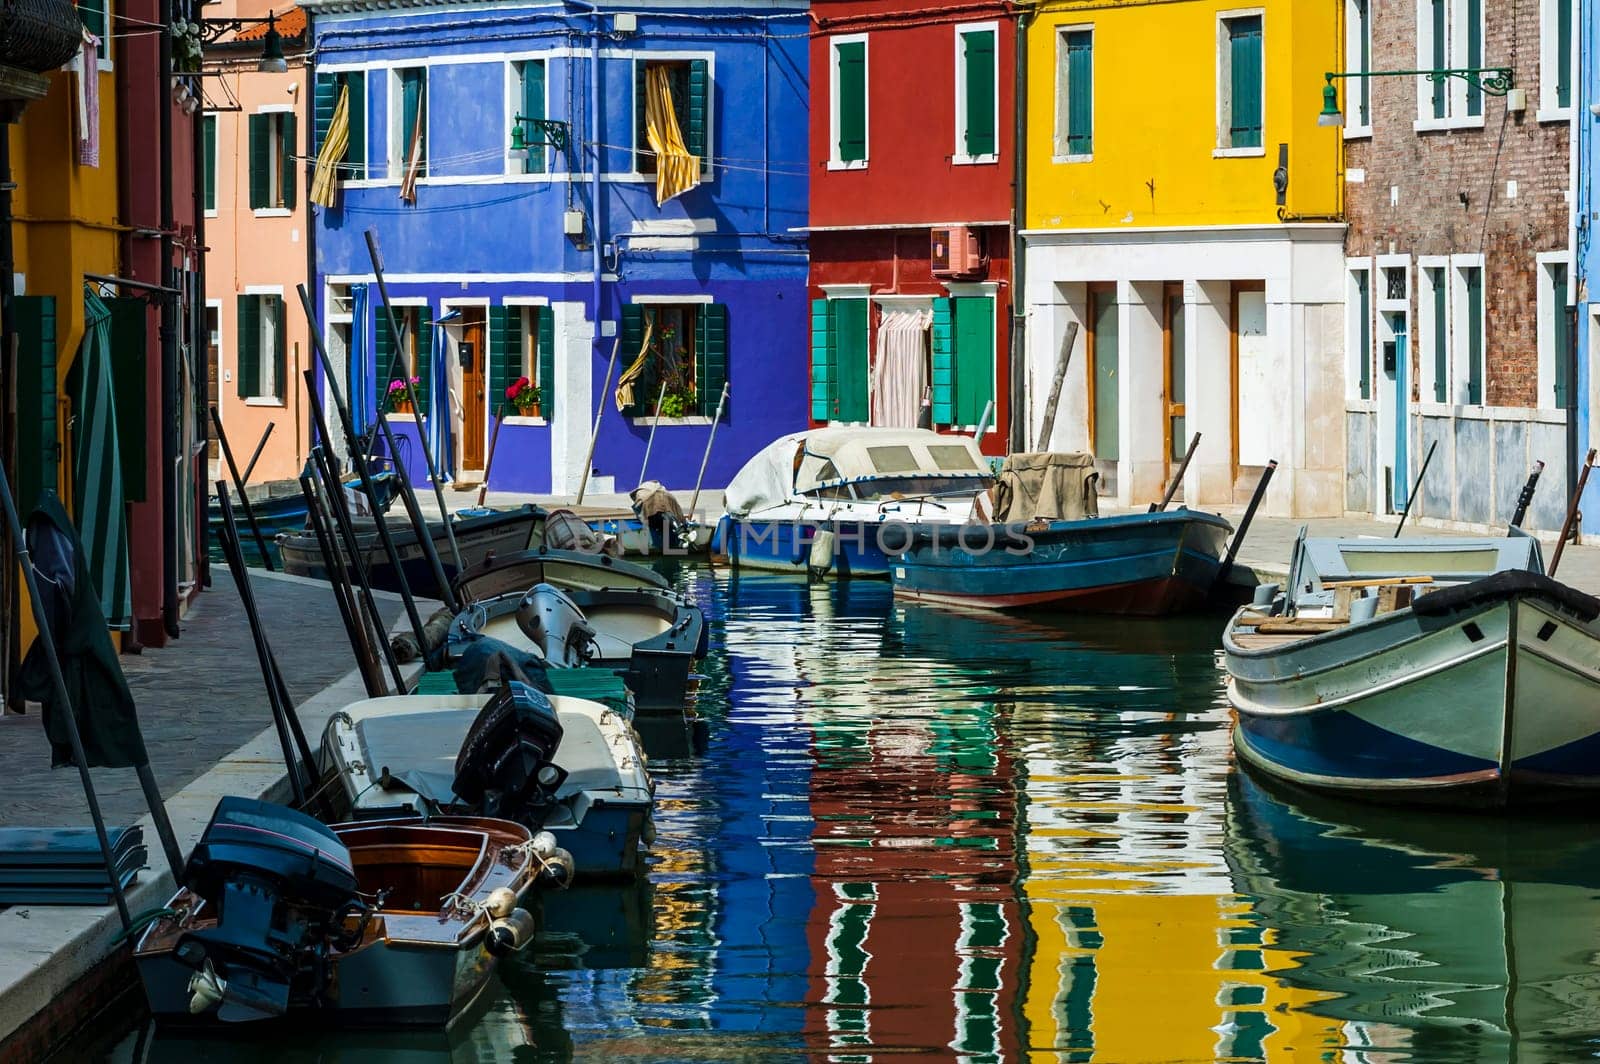 The colors of Burano, Venice by Giamplume